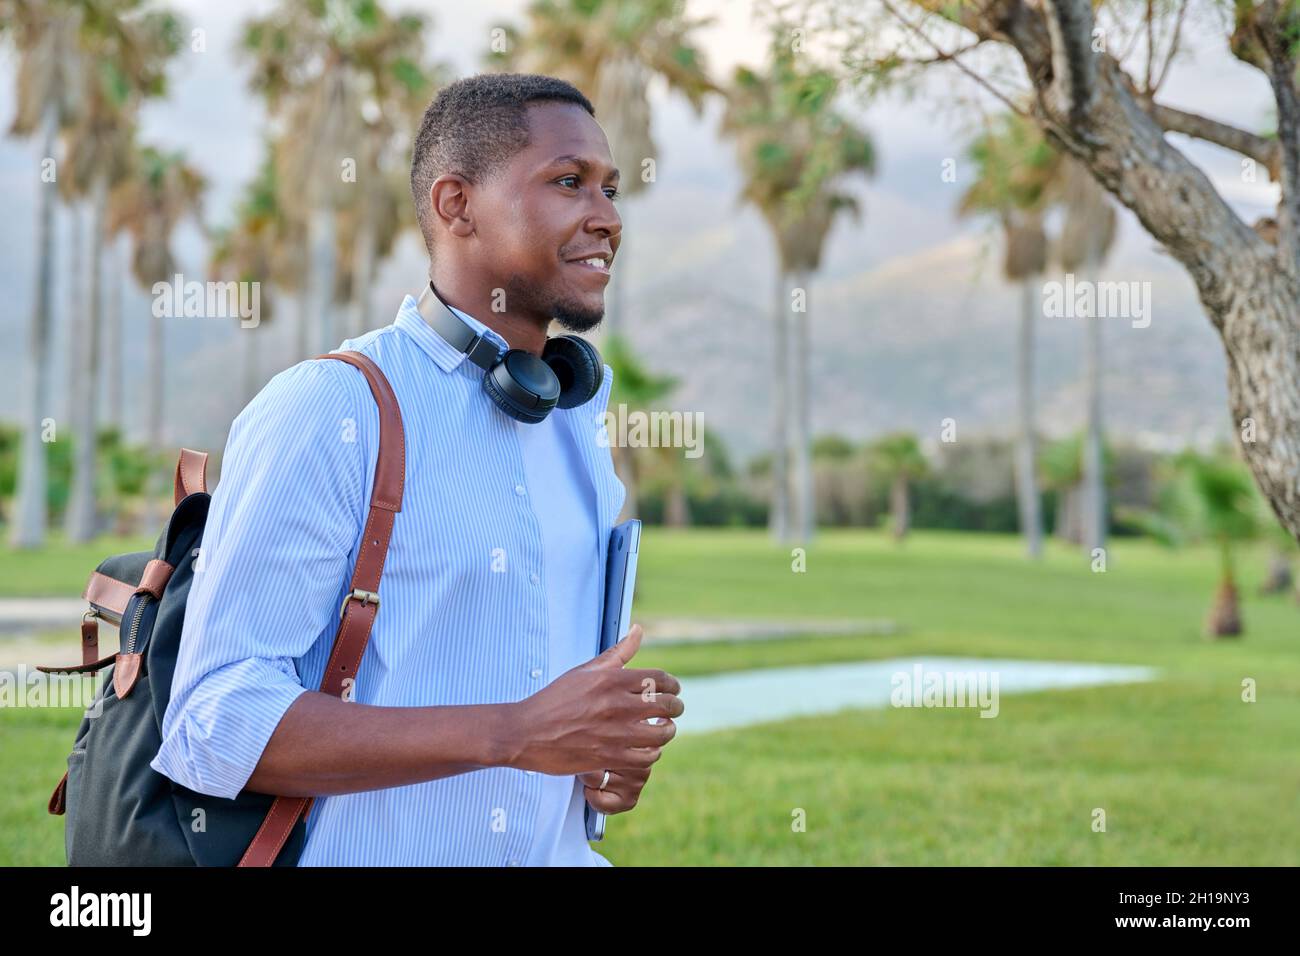 Outdoor portrait of young man with laptop headphones and backpack Stock Photo